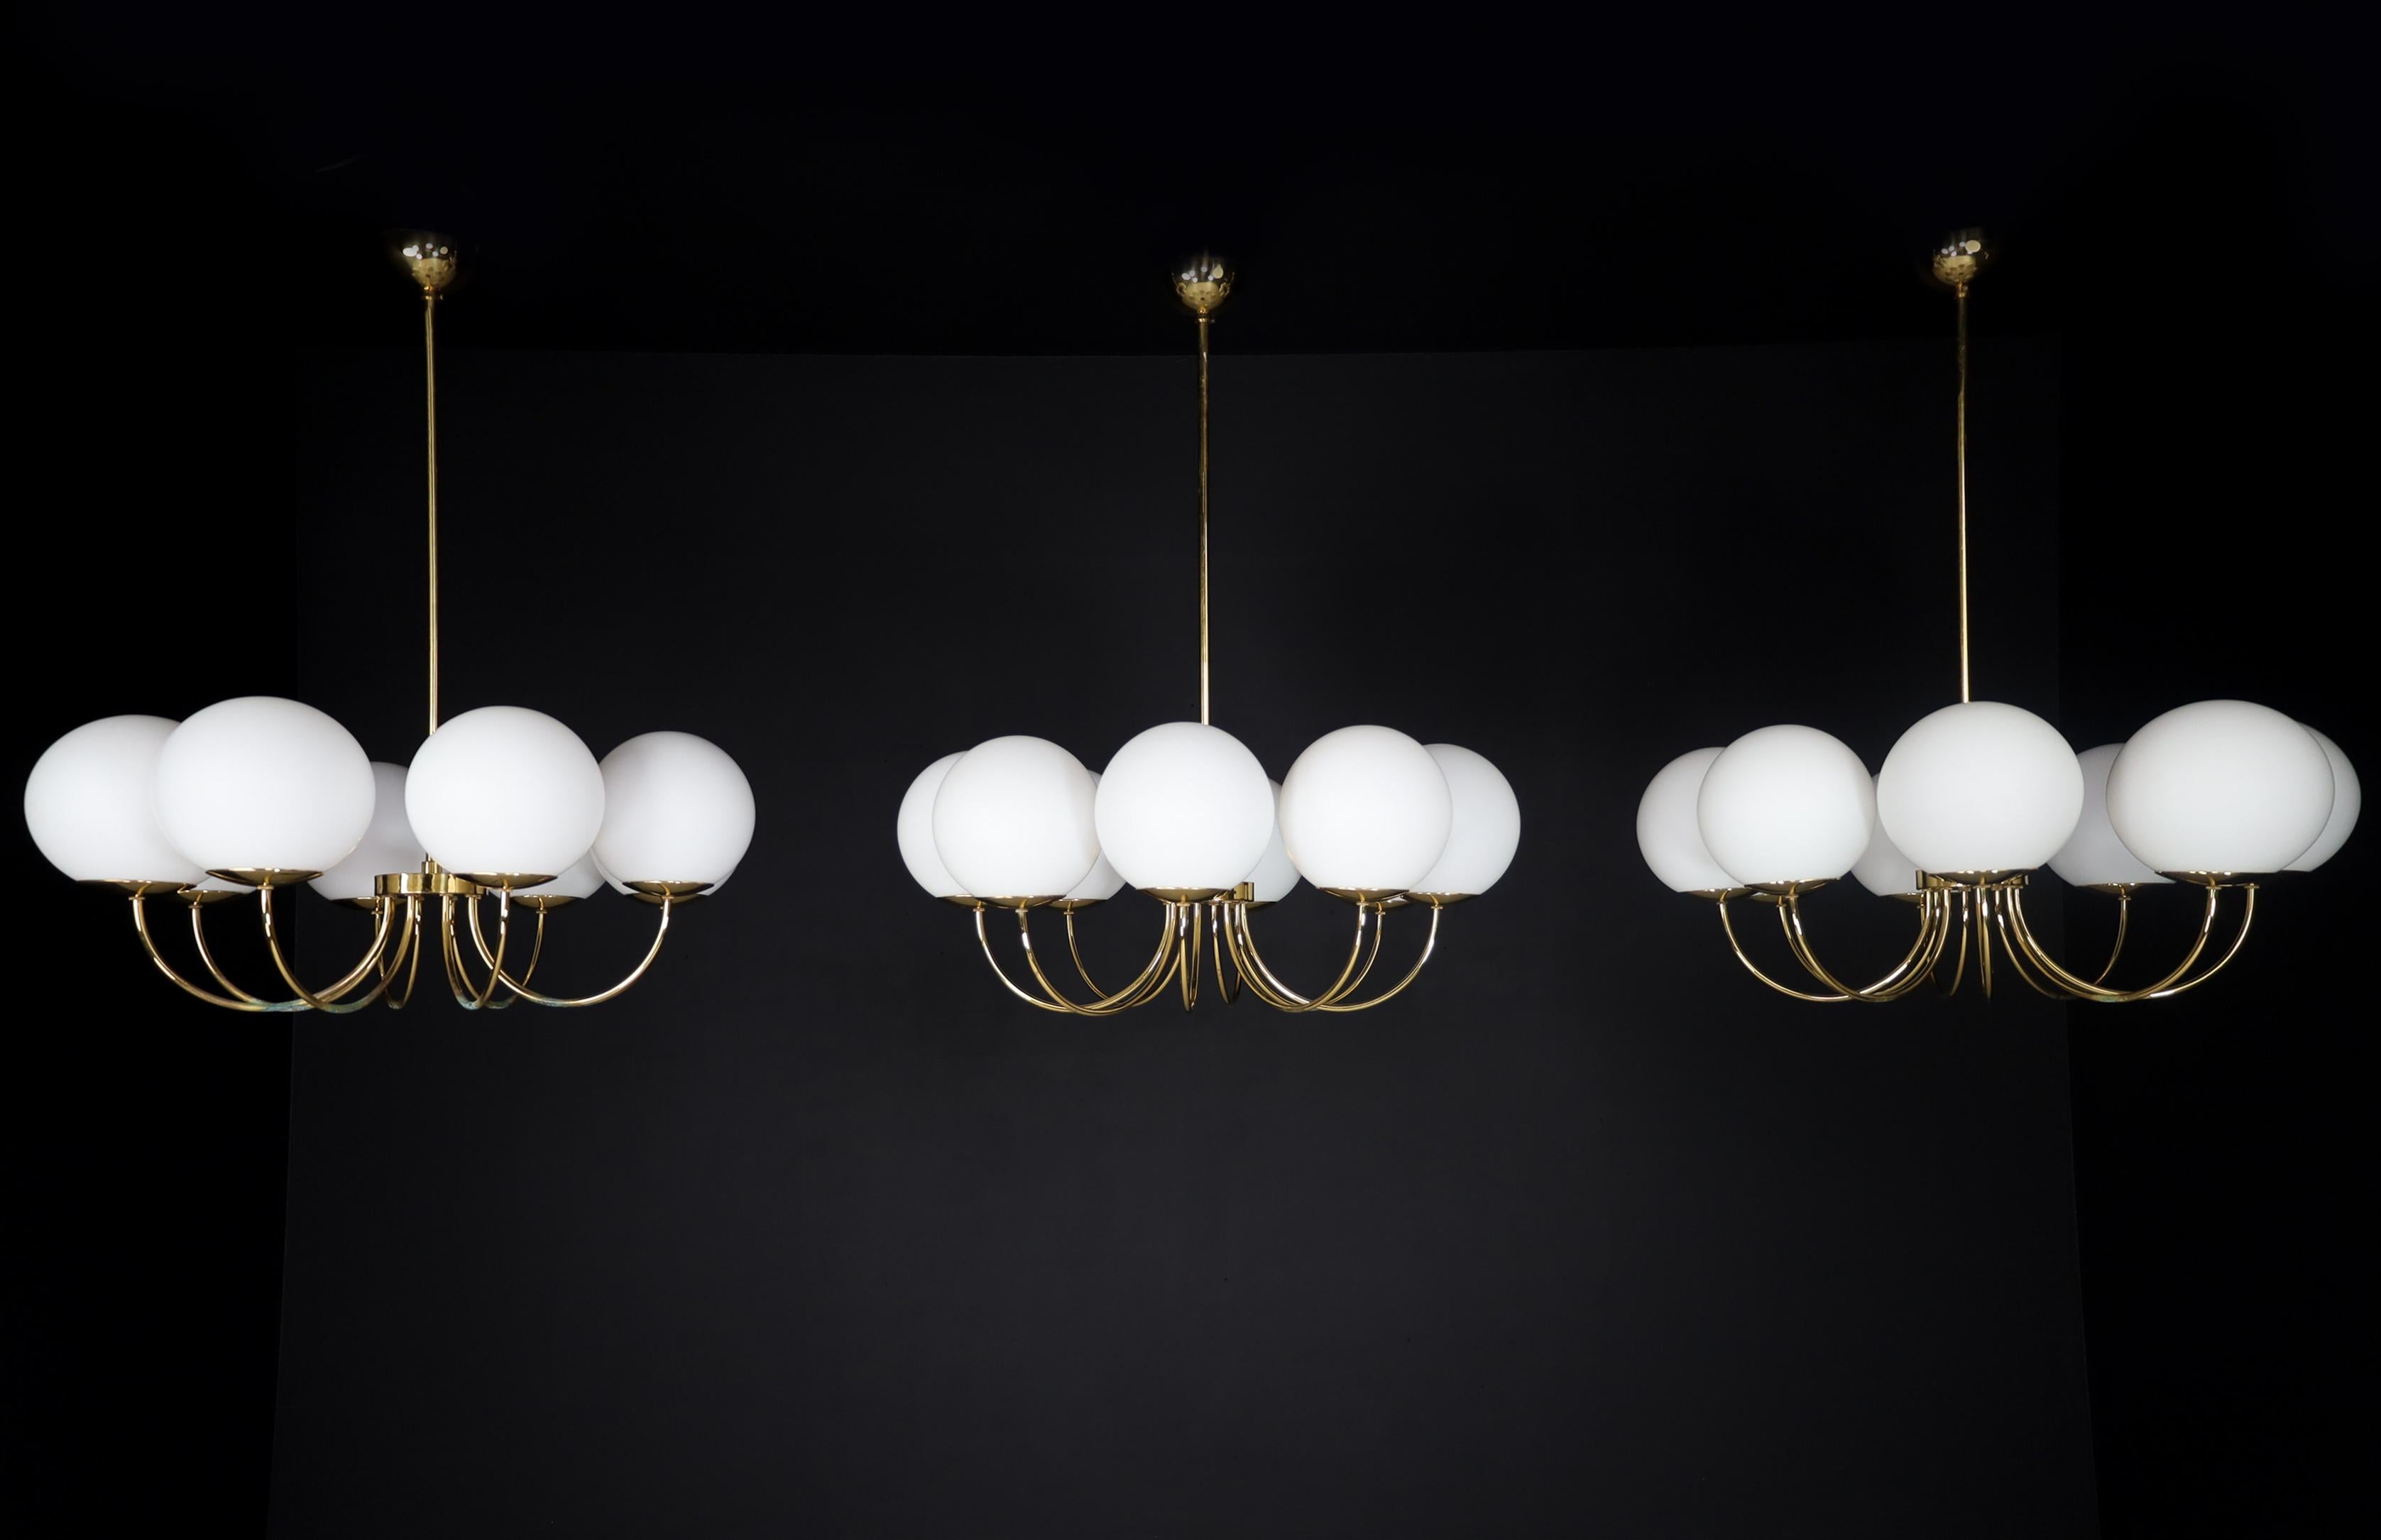 1 of 3 Elegant Chandeliers with Brass Fixture and Opaline Glass Globes, 1960s For Sale 11